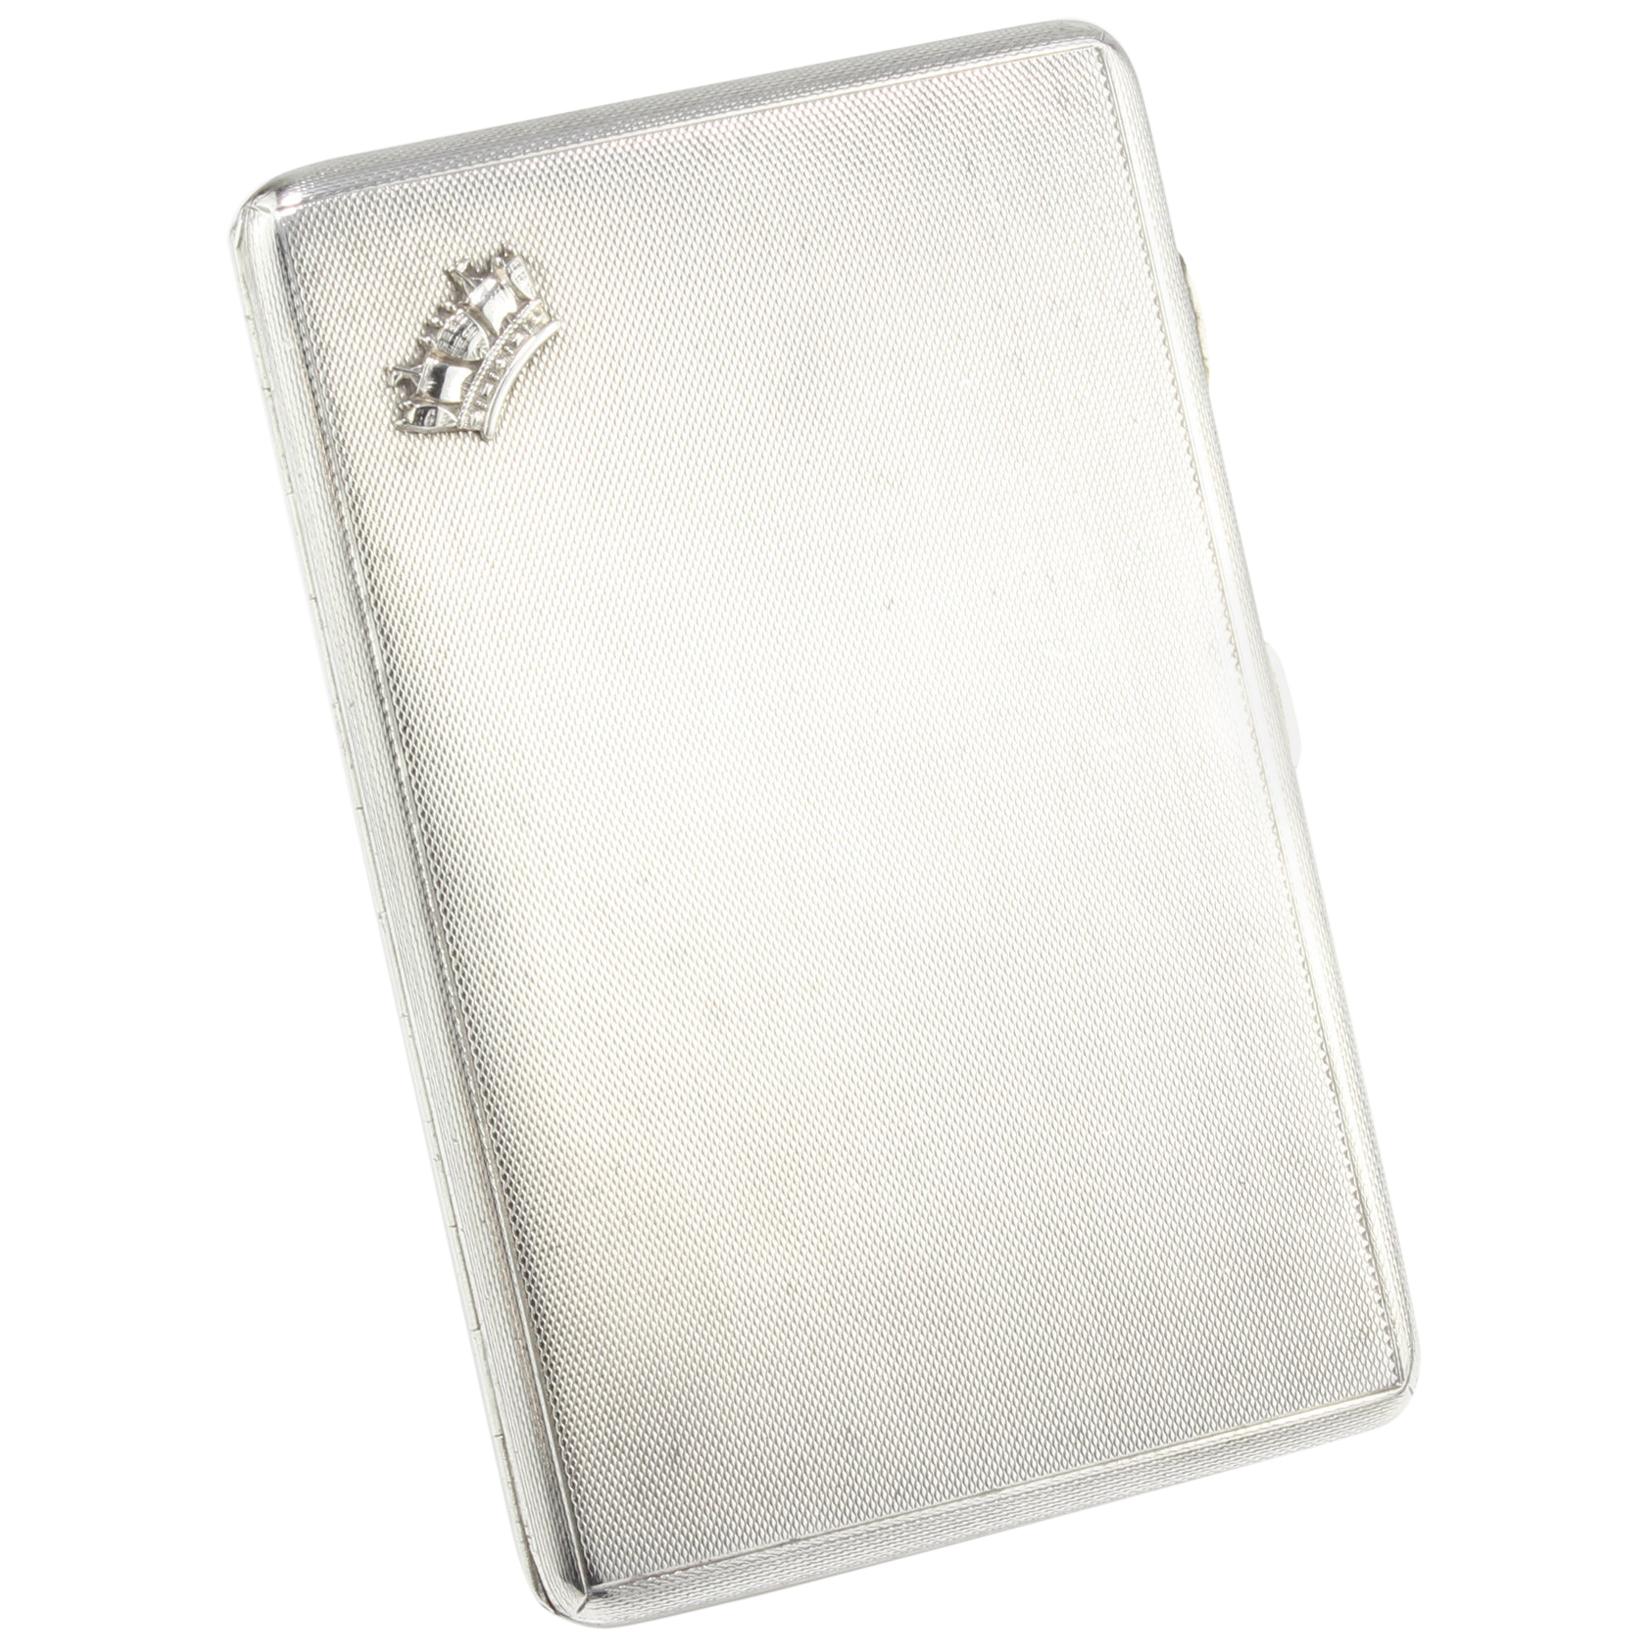 Antique sterling silver card case by Sampson Mordan & Co, 1932